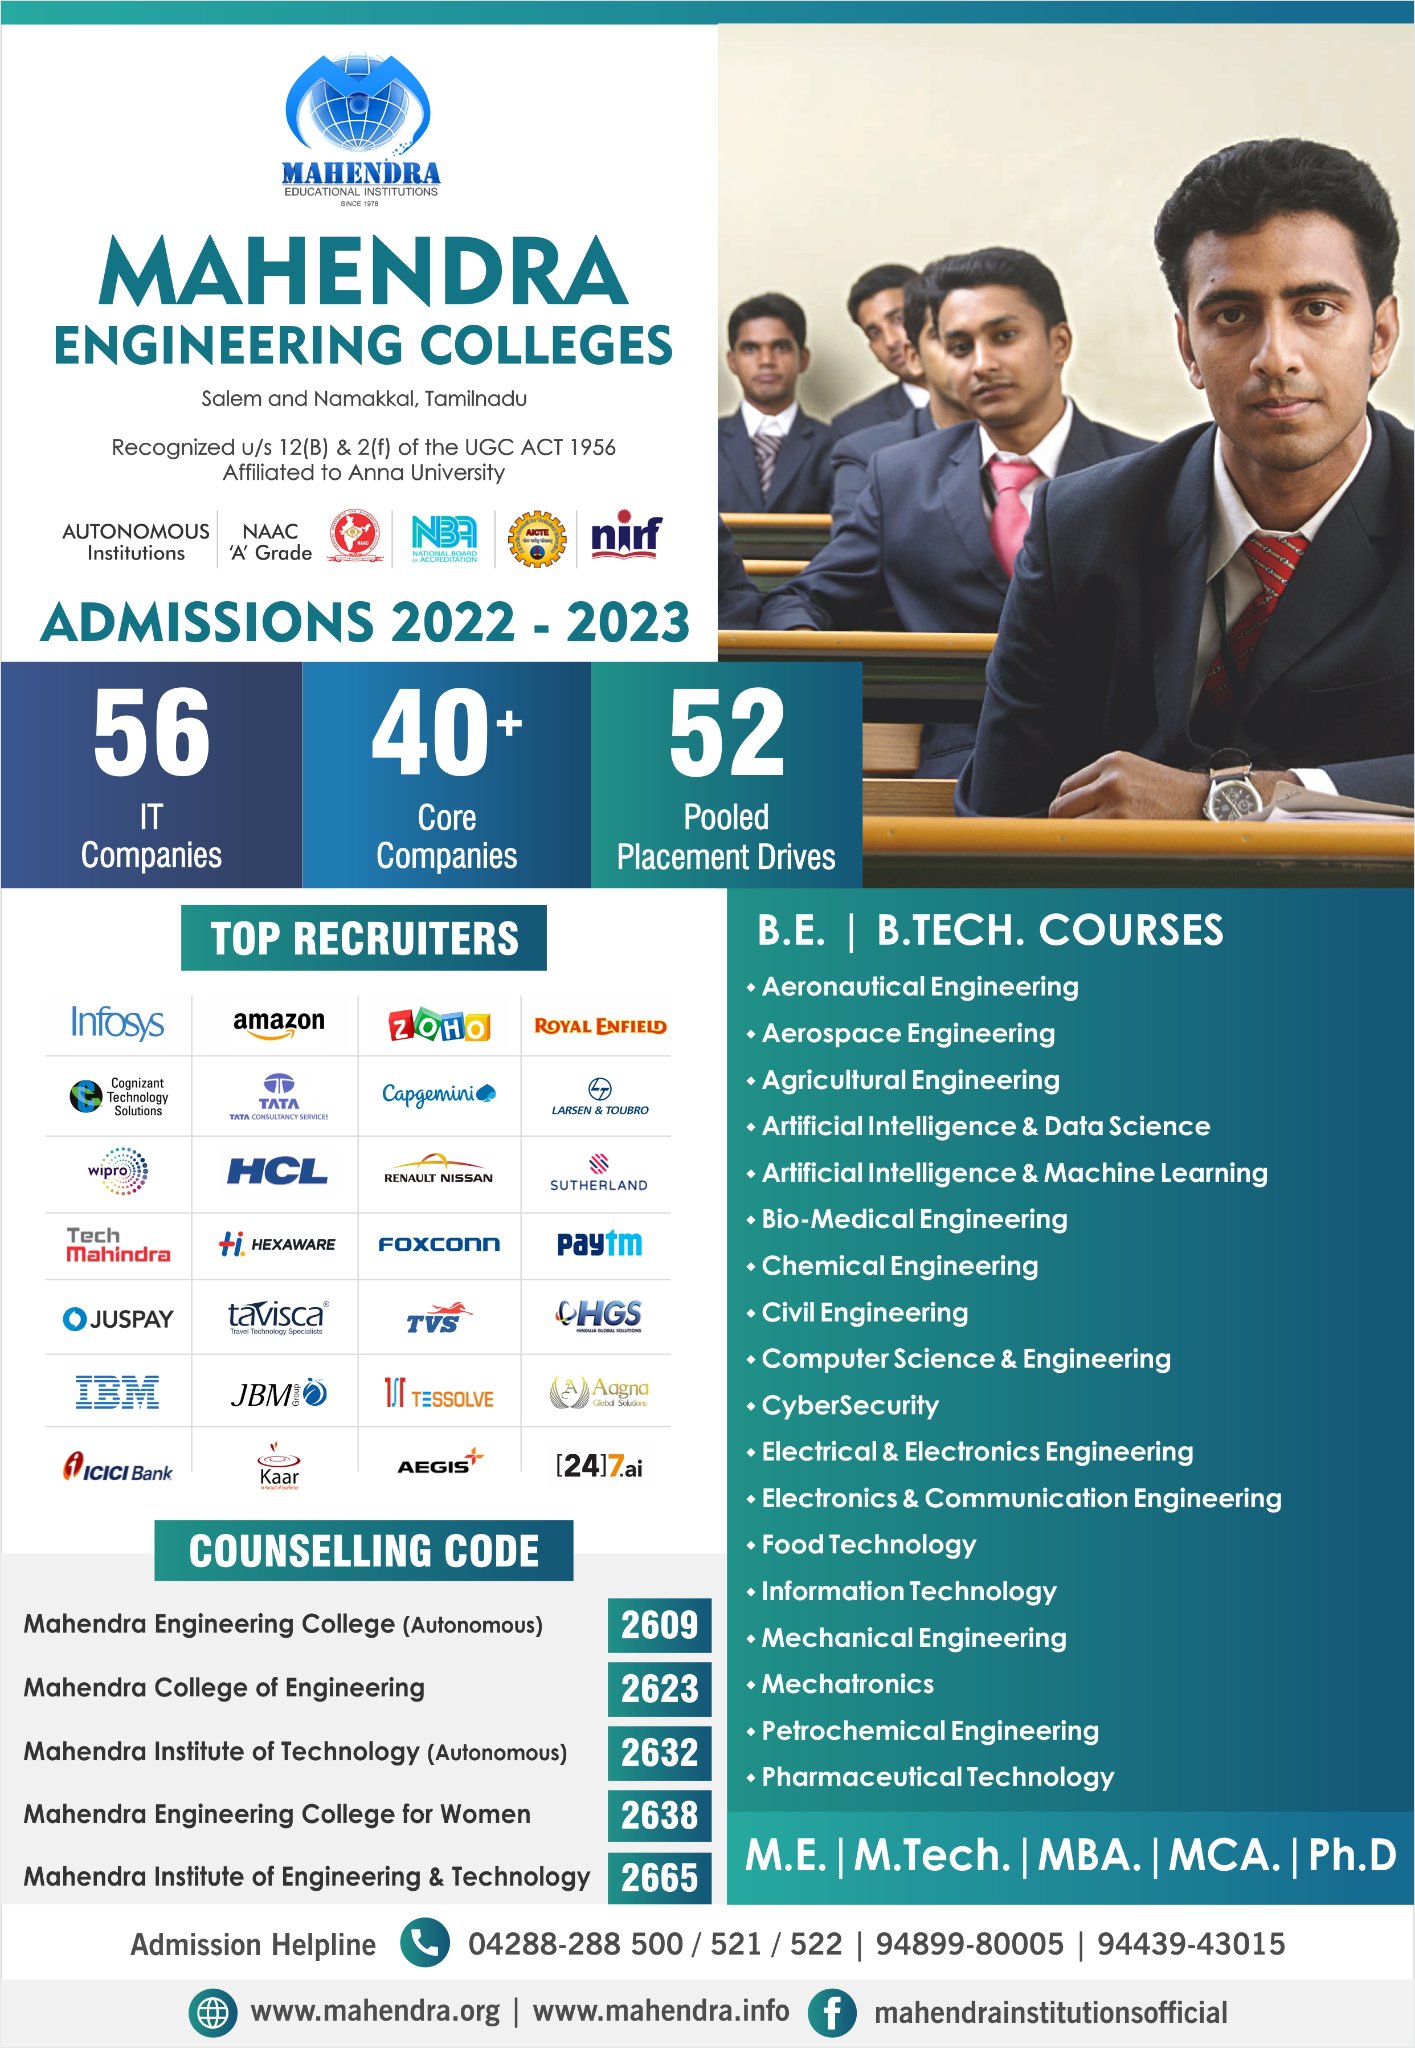 Admissions 2022-2023 - Mahendra Institute of Technology